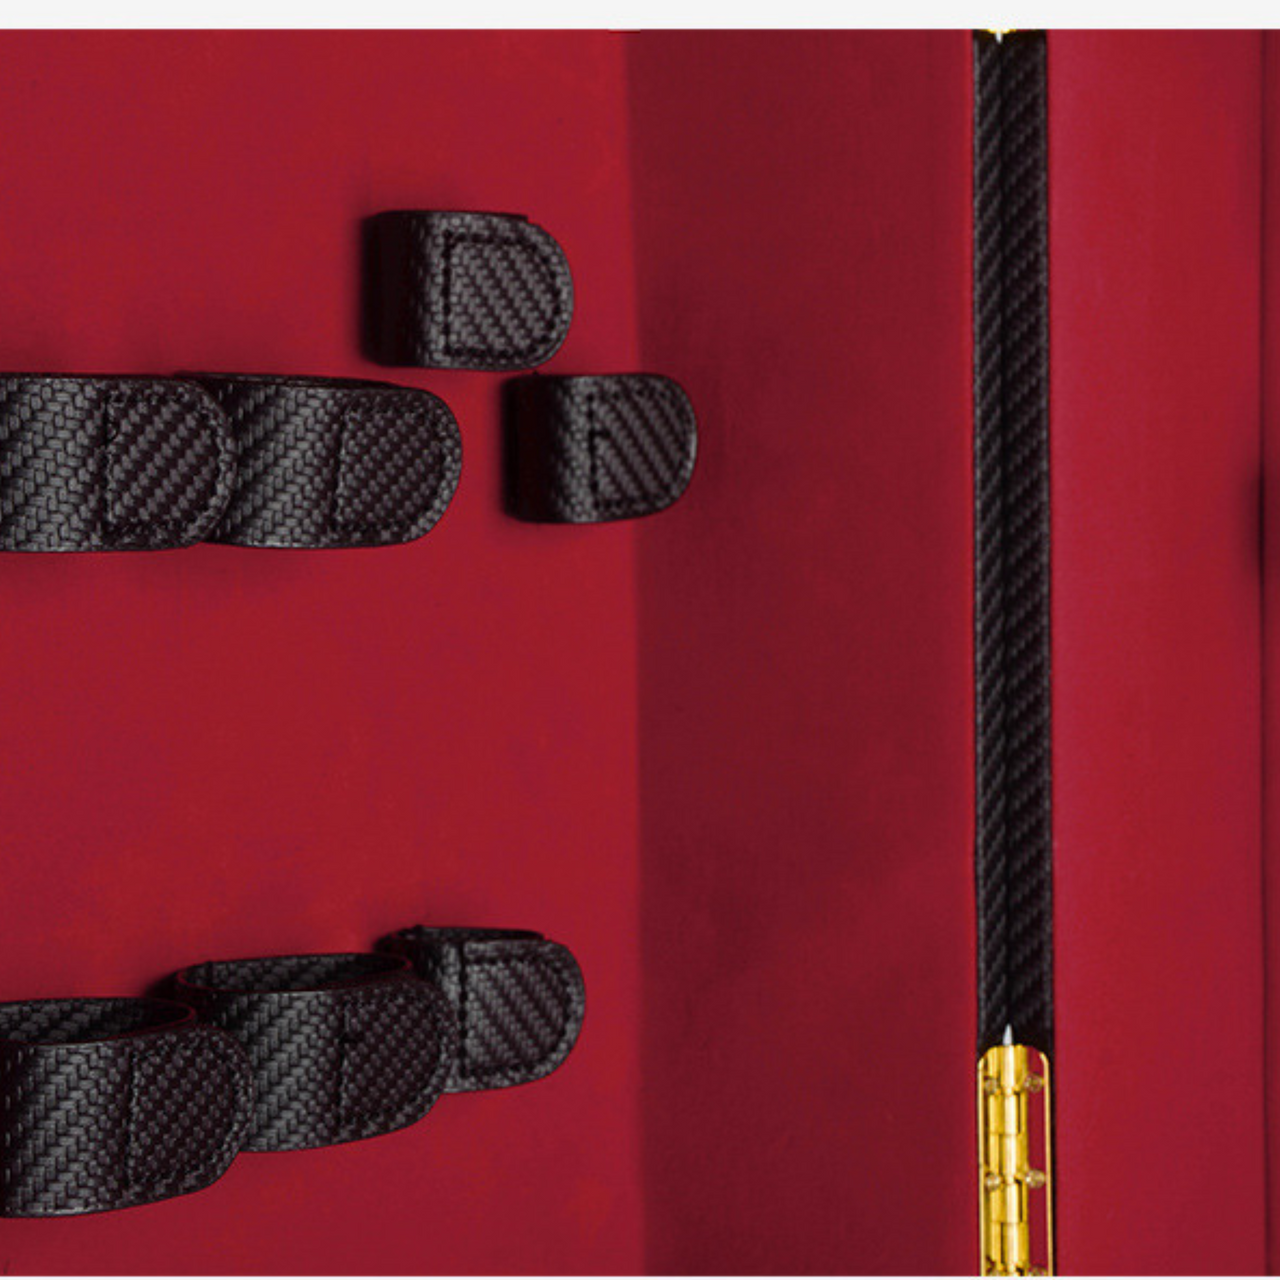 Luxury Lockable Faux Leather and Velvet Trunk for the Elegant and Private Storage of your Adult Toys